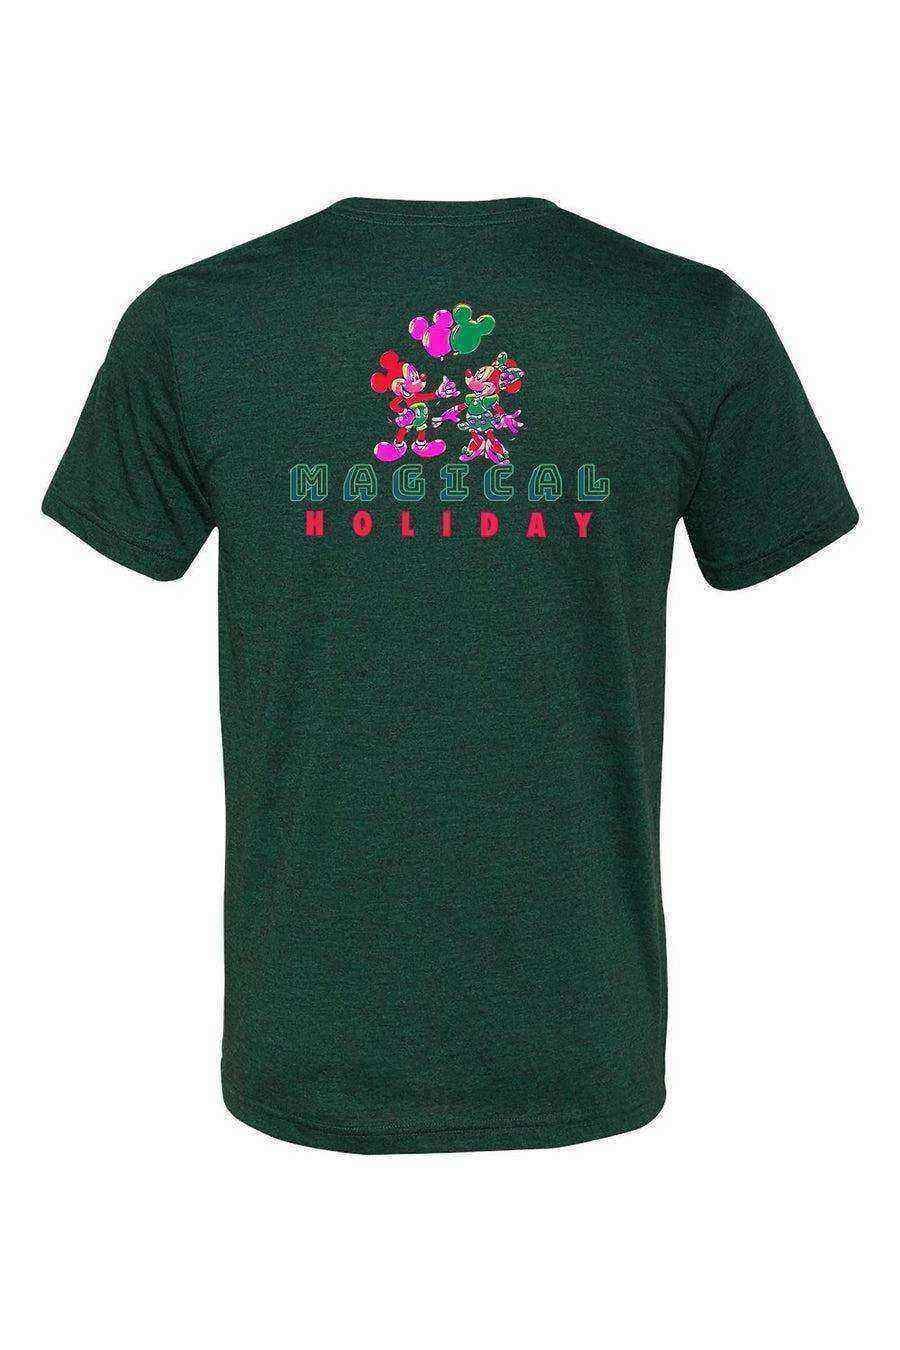 Youth | Mouse Magical Holiday Shirt | Minnie & Mickey Christmas - Dylan's Tees